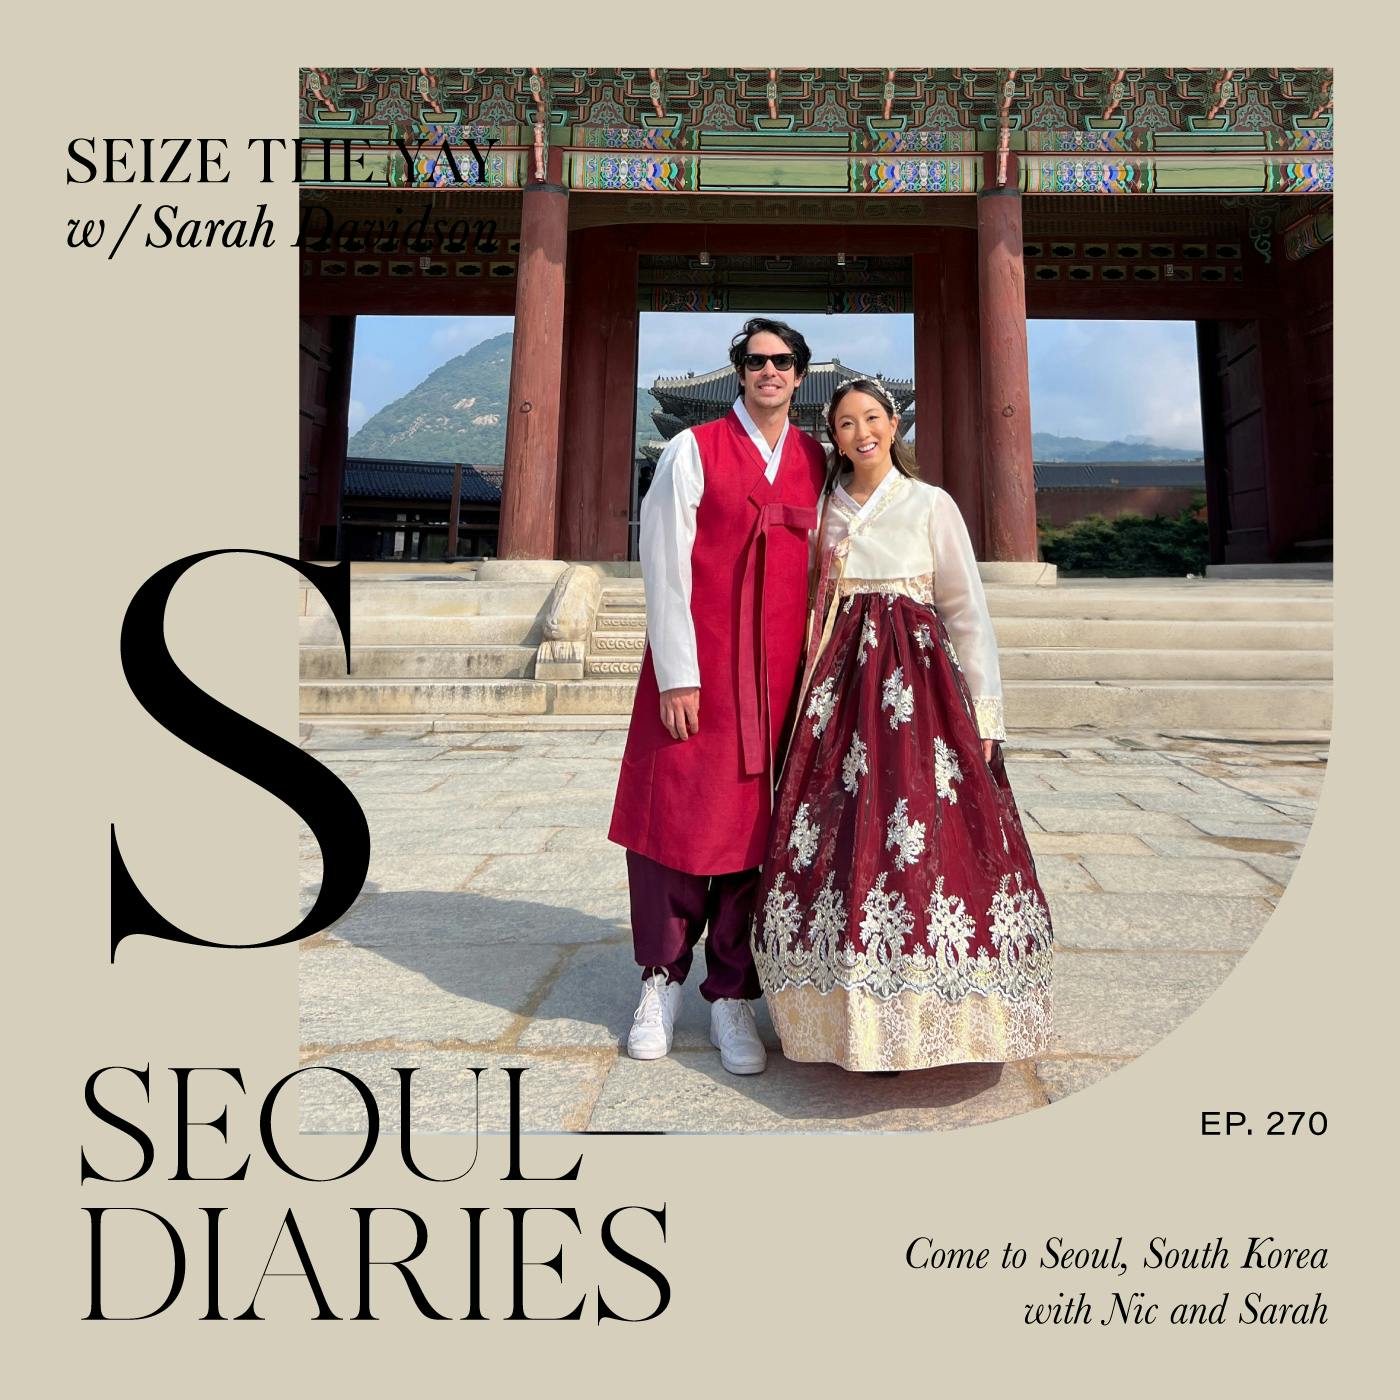 The Seoul Diaries with Niccyboy